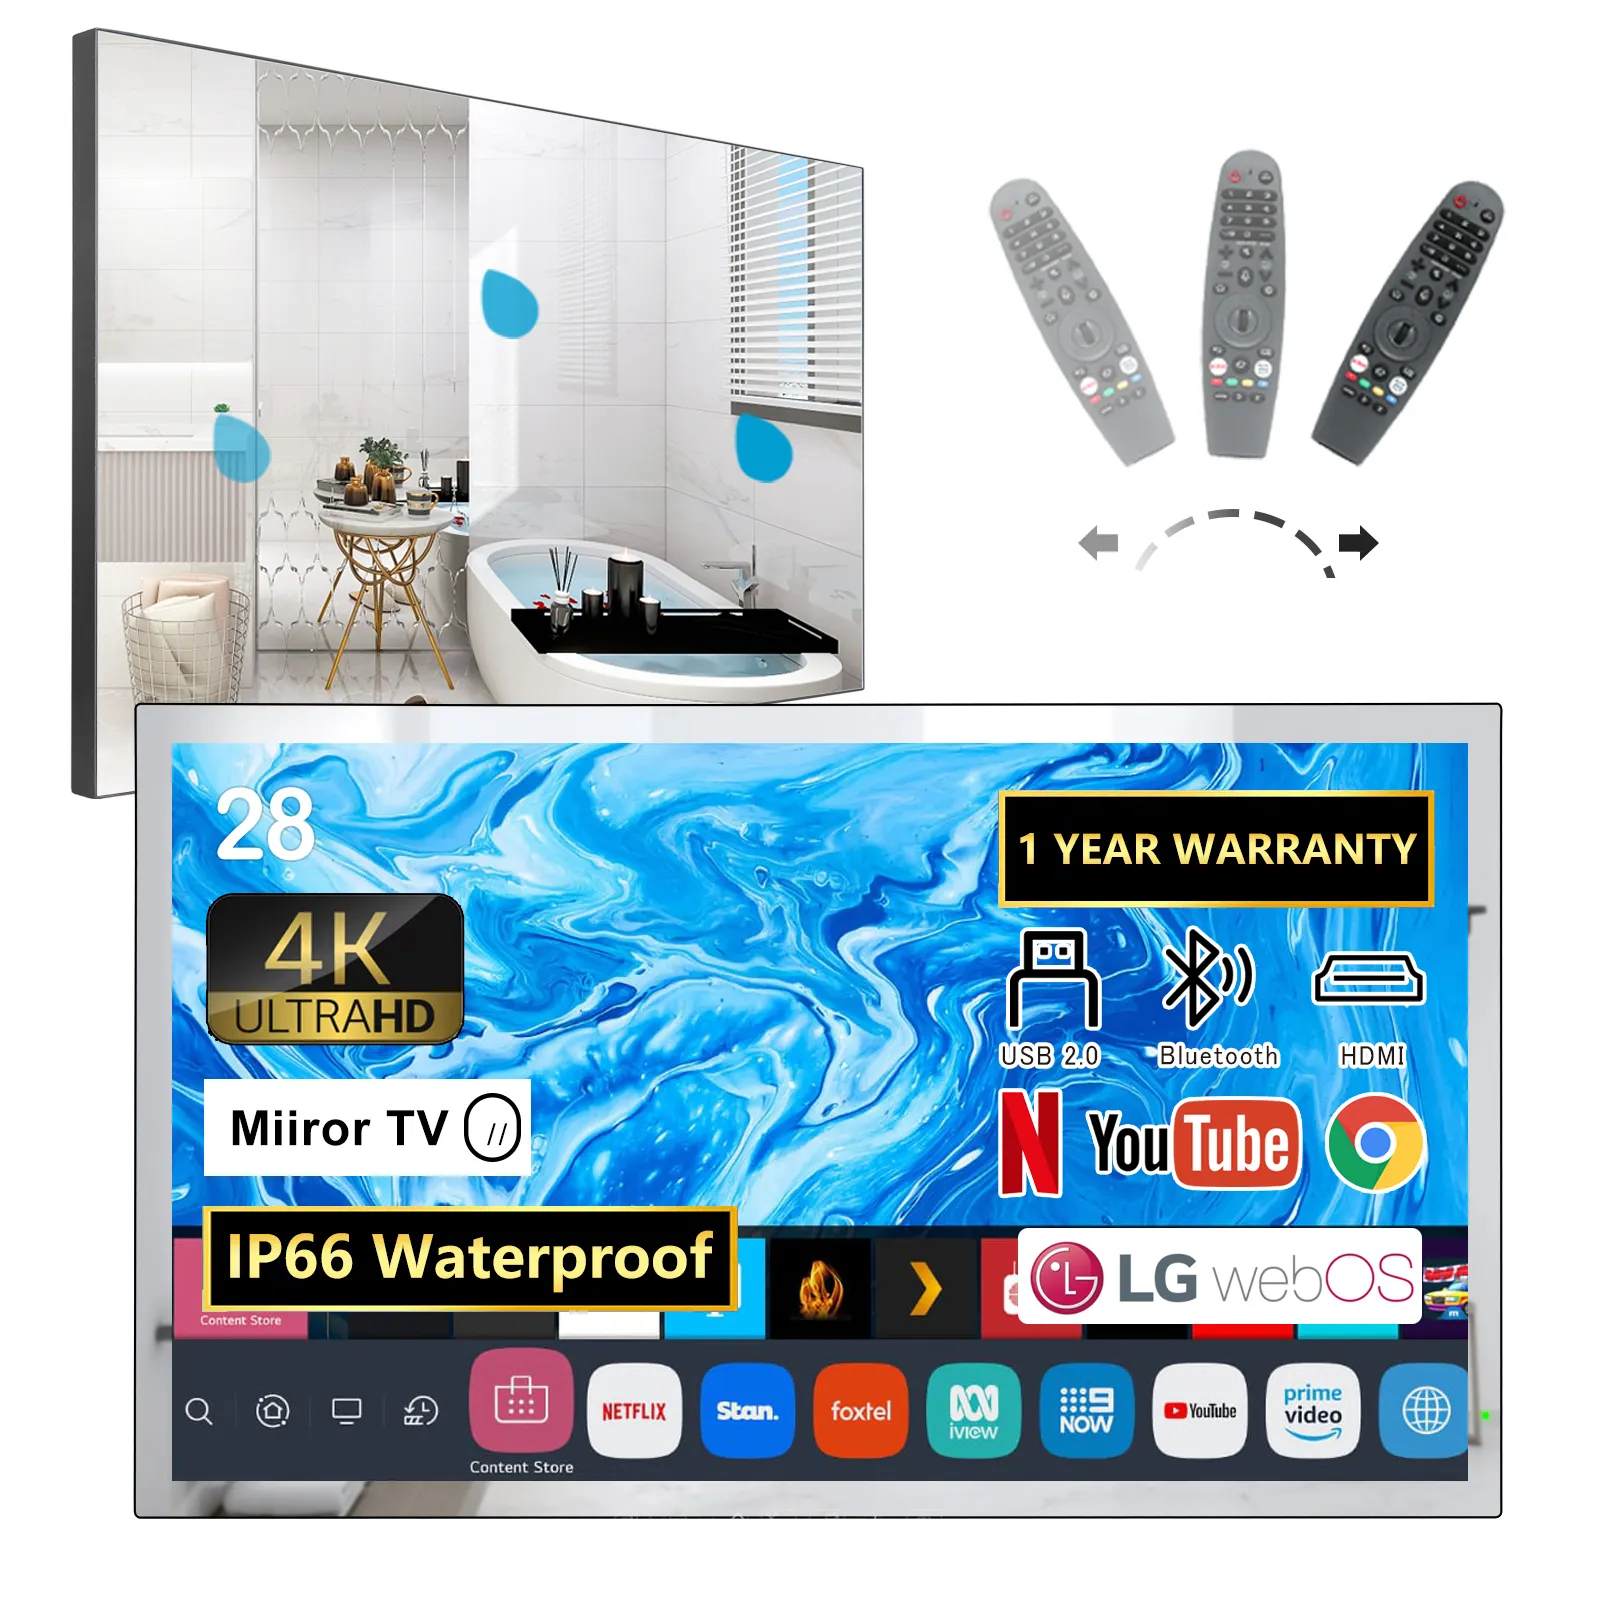 28 Inches 3840x2160 High Resolution 4K Mirror Bathroom TV Waterproof Smart Television WebOS System Streaming APPs Alexa Control